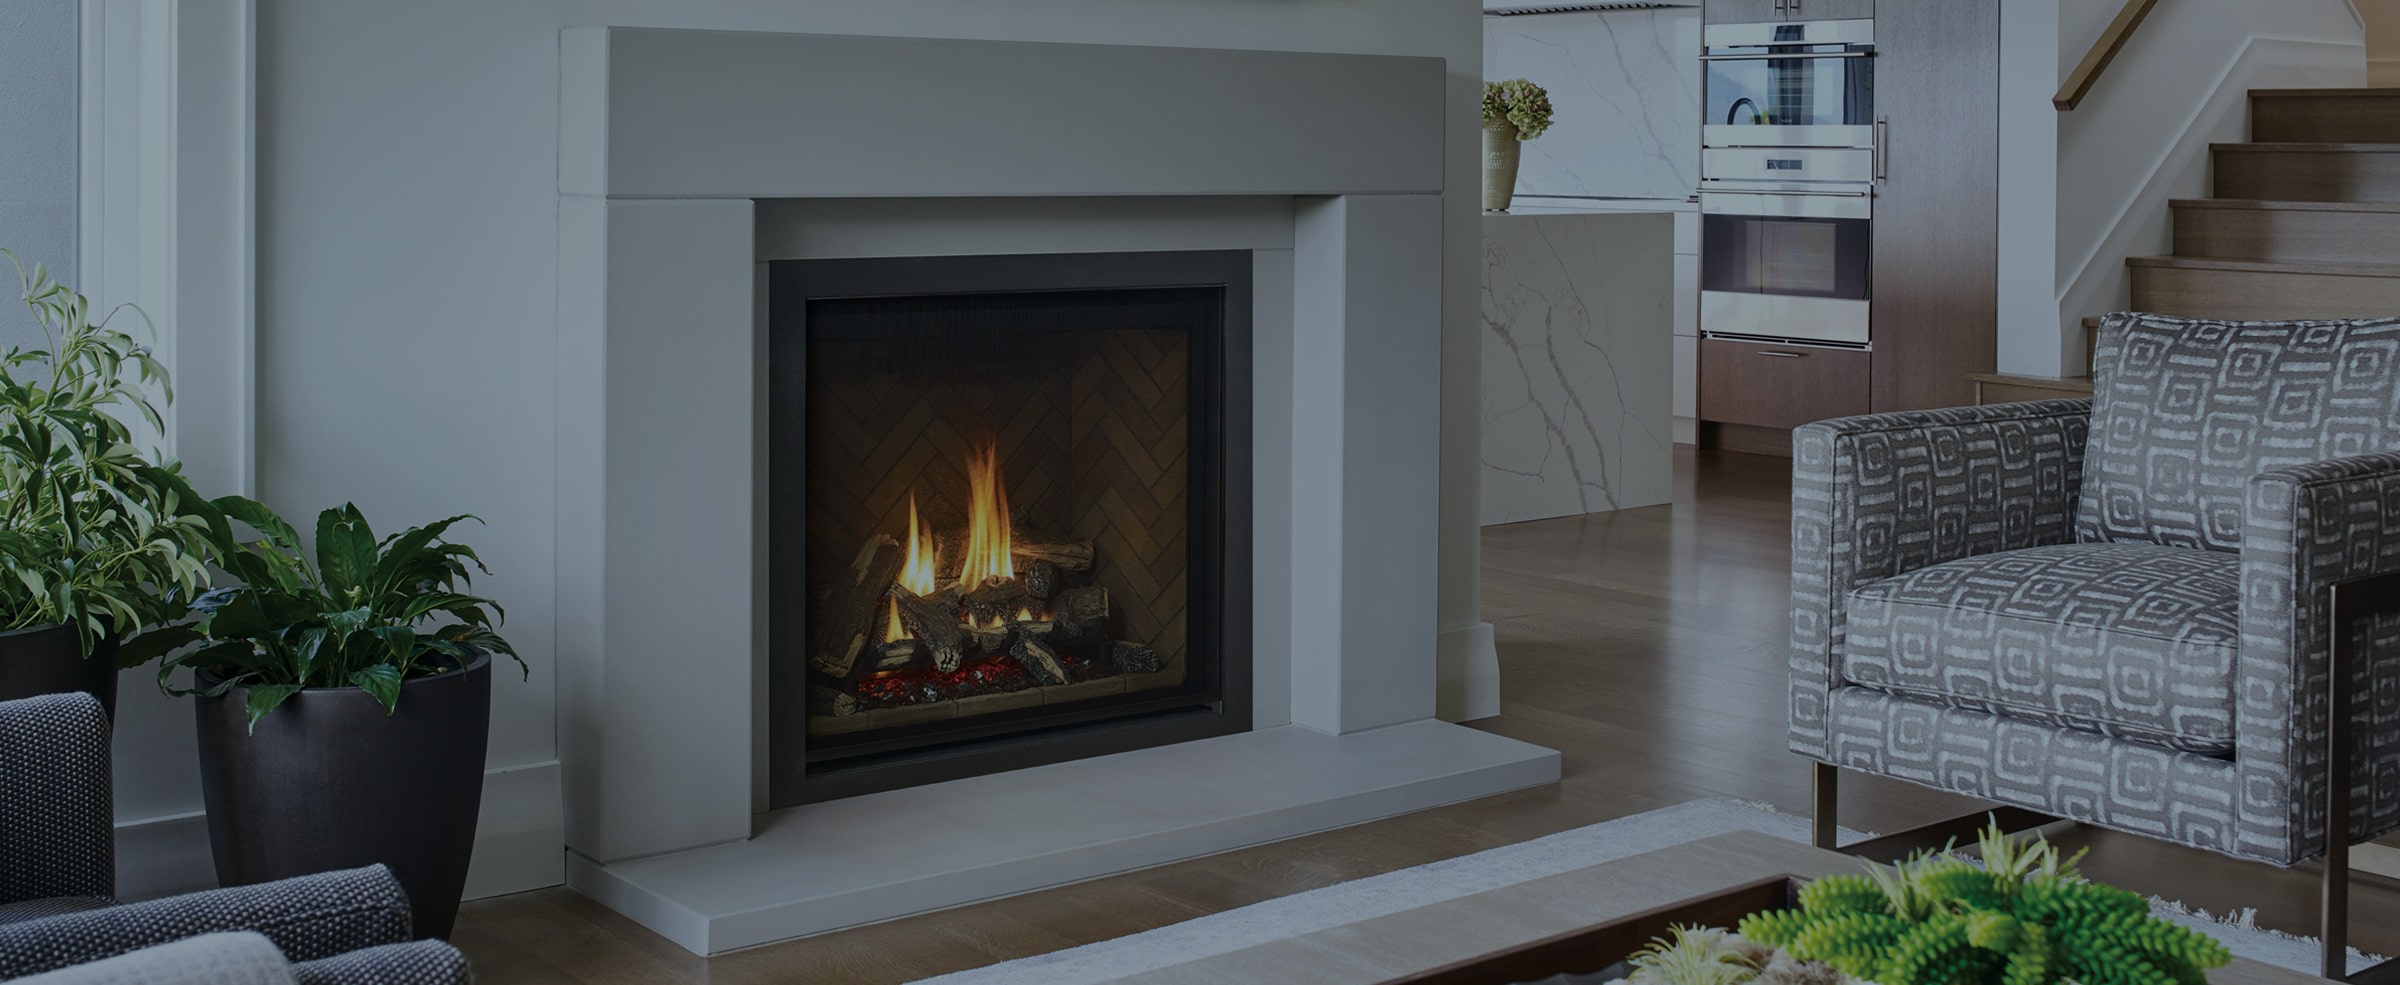 Triangle, VA Gas Fireplace Services